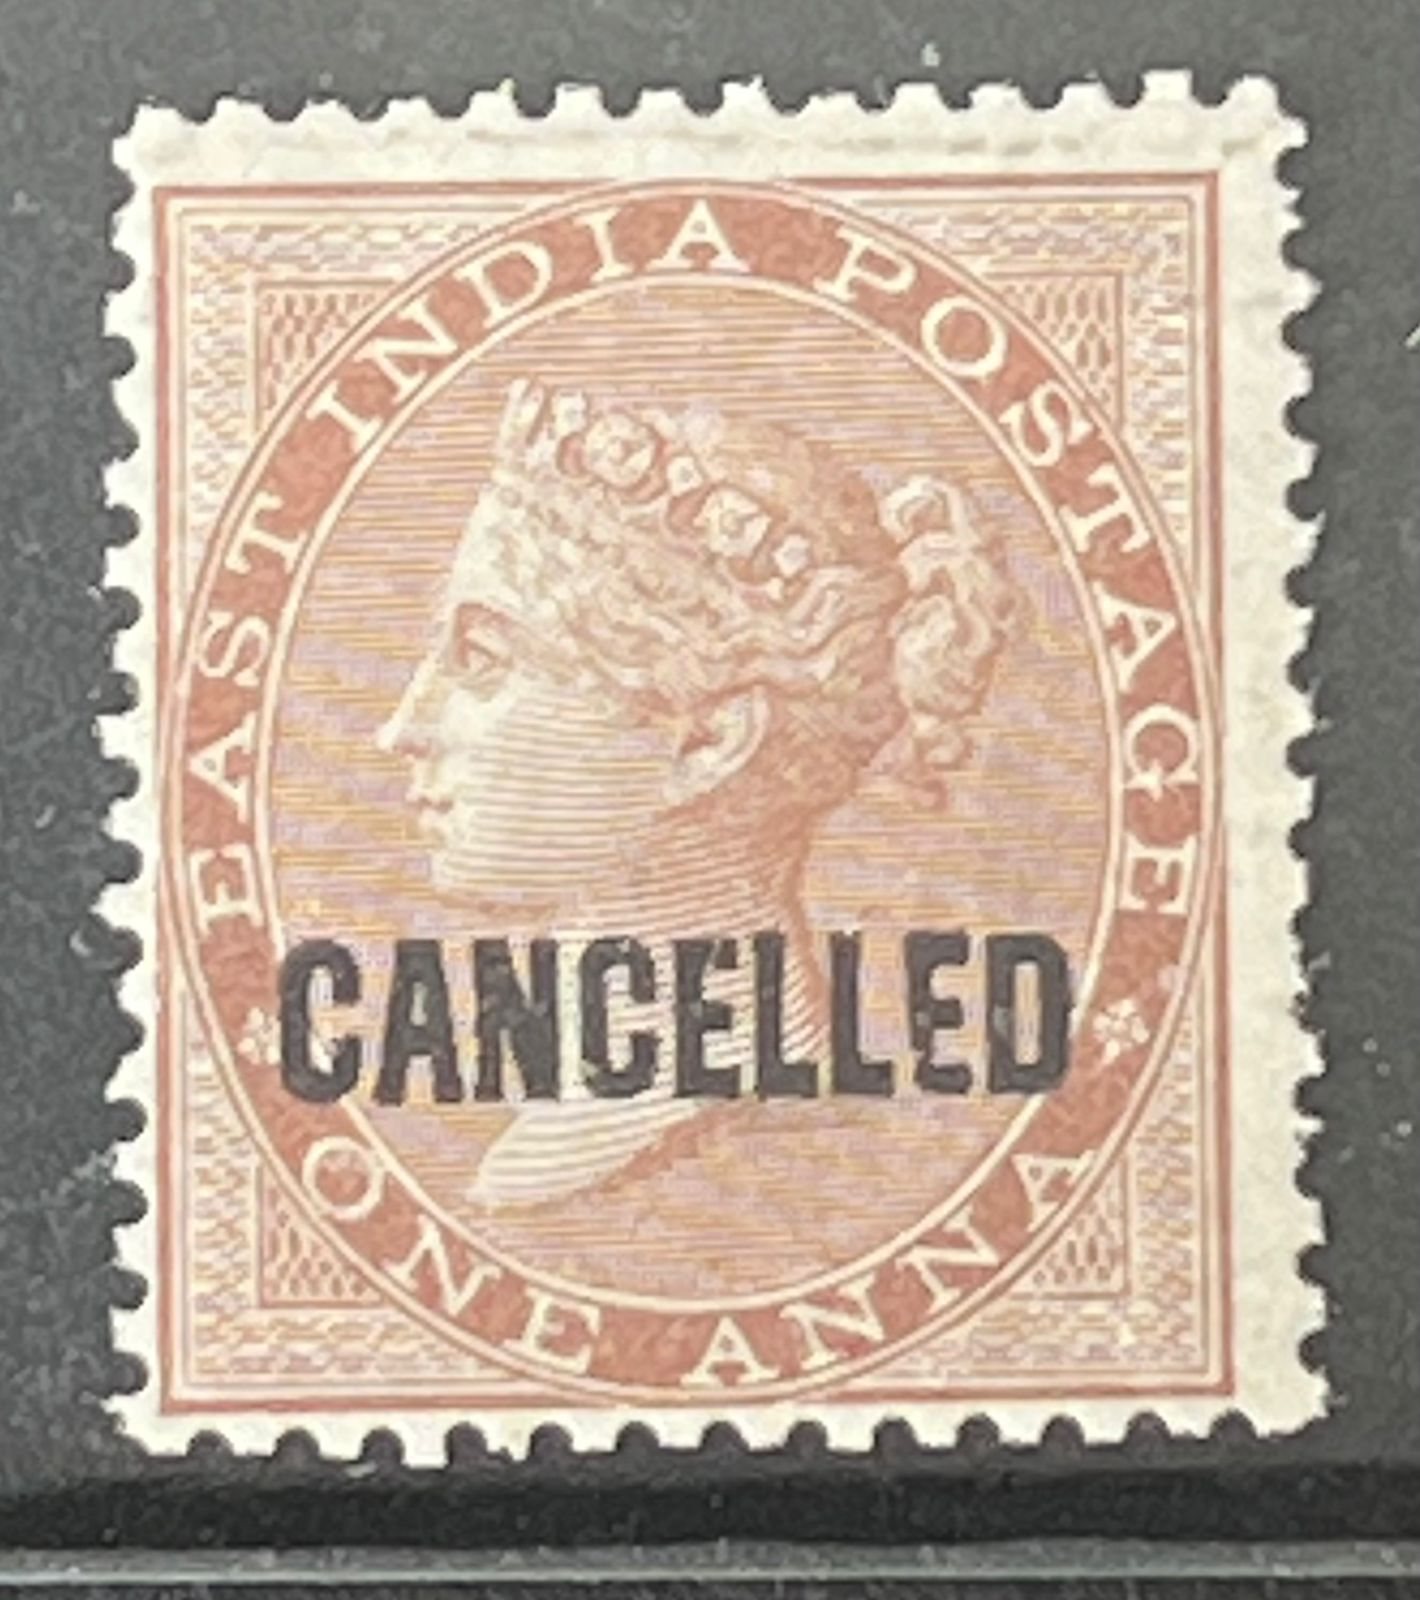 India 1865 QV East India Co 1a CANCELLED Overprint Scarce